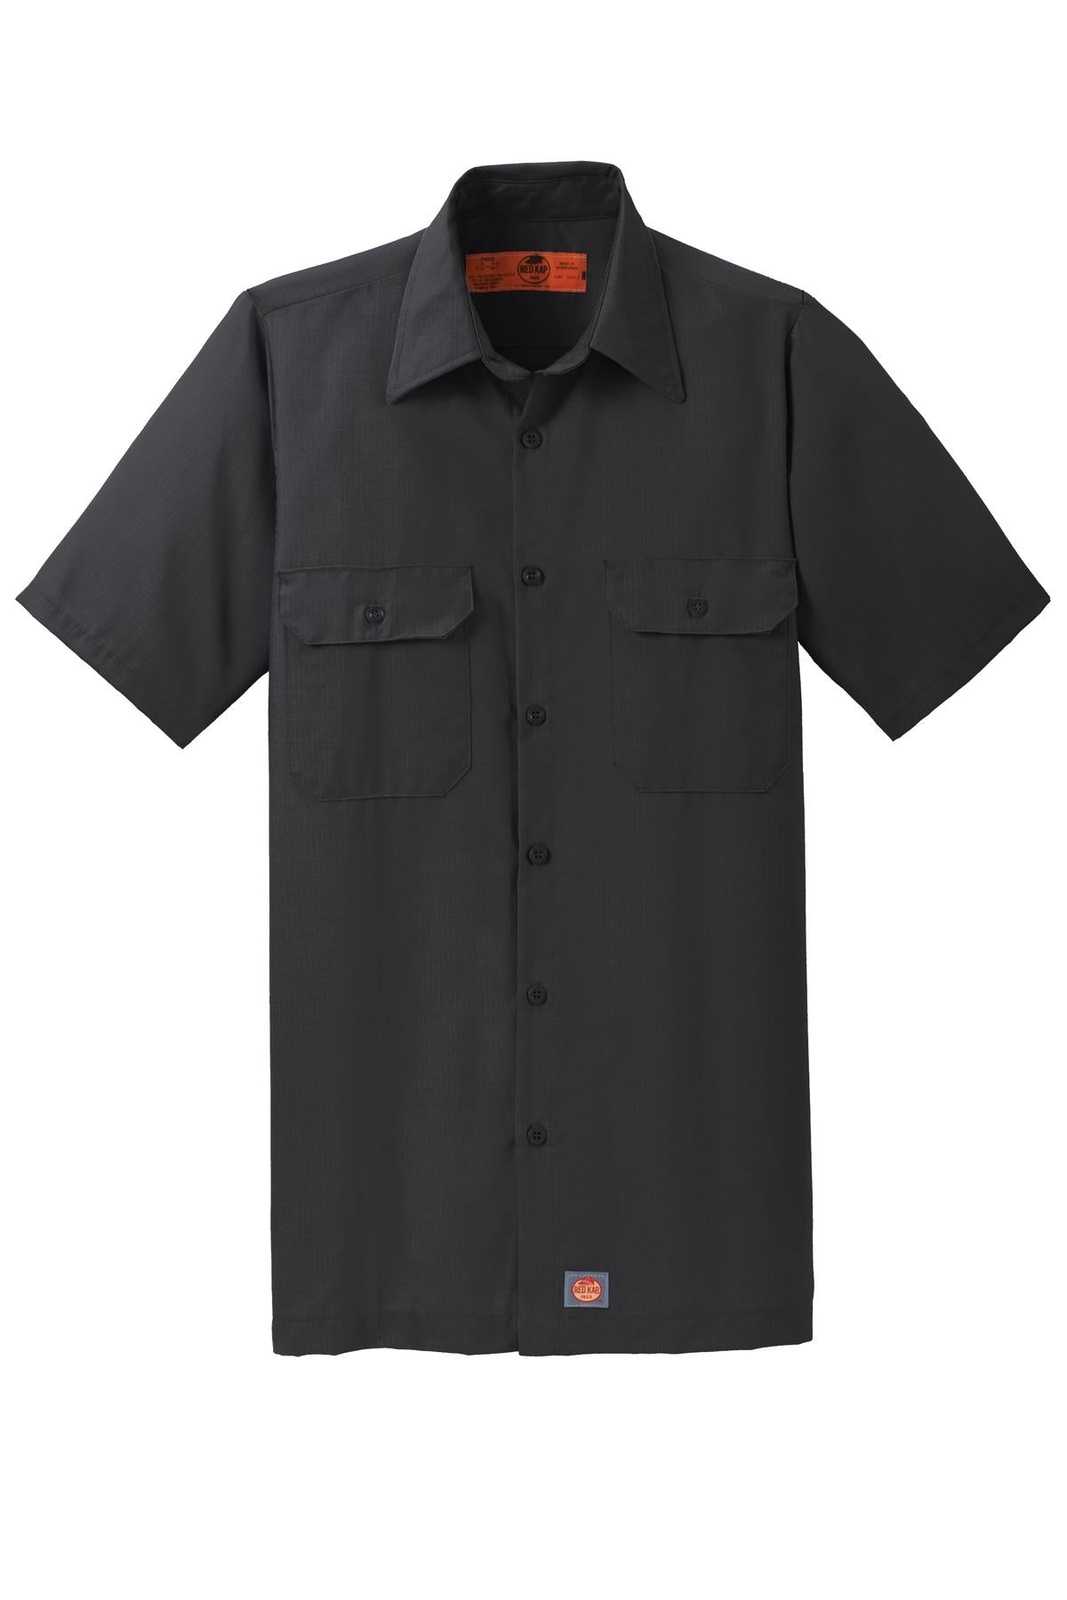 Red Kap SY60 Short Sleeve Solid Ripstop Shirt - Black - HIT a Double - 3